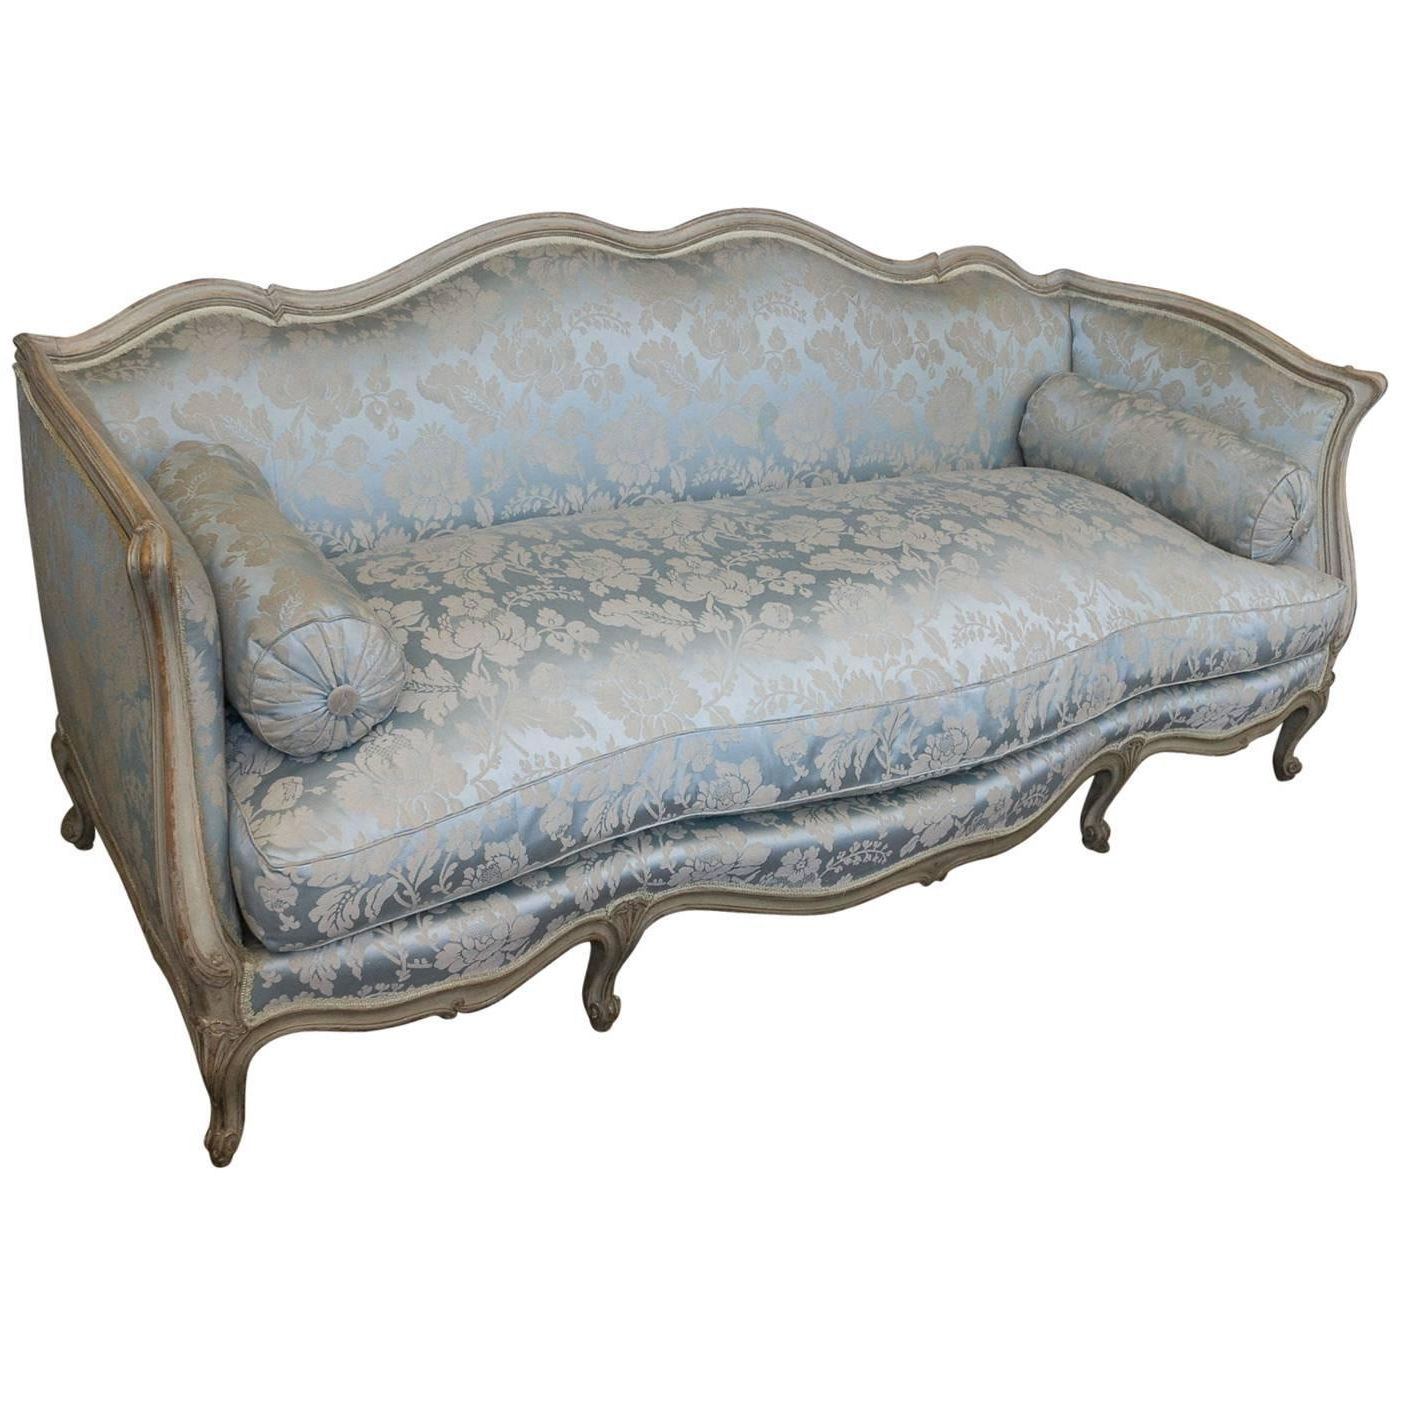 French Louis Xv Style Sofa Attributed To Maison Jansen For Sale At For 2017 French Style Sofas (View 15 of 15)